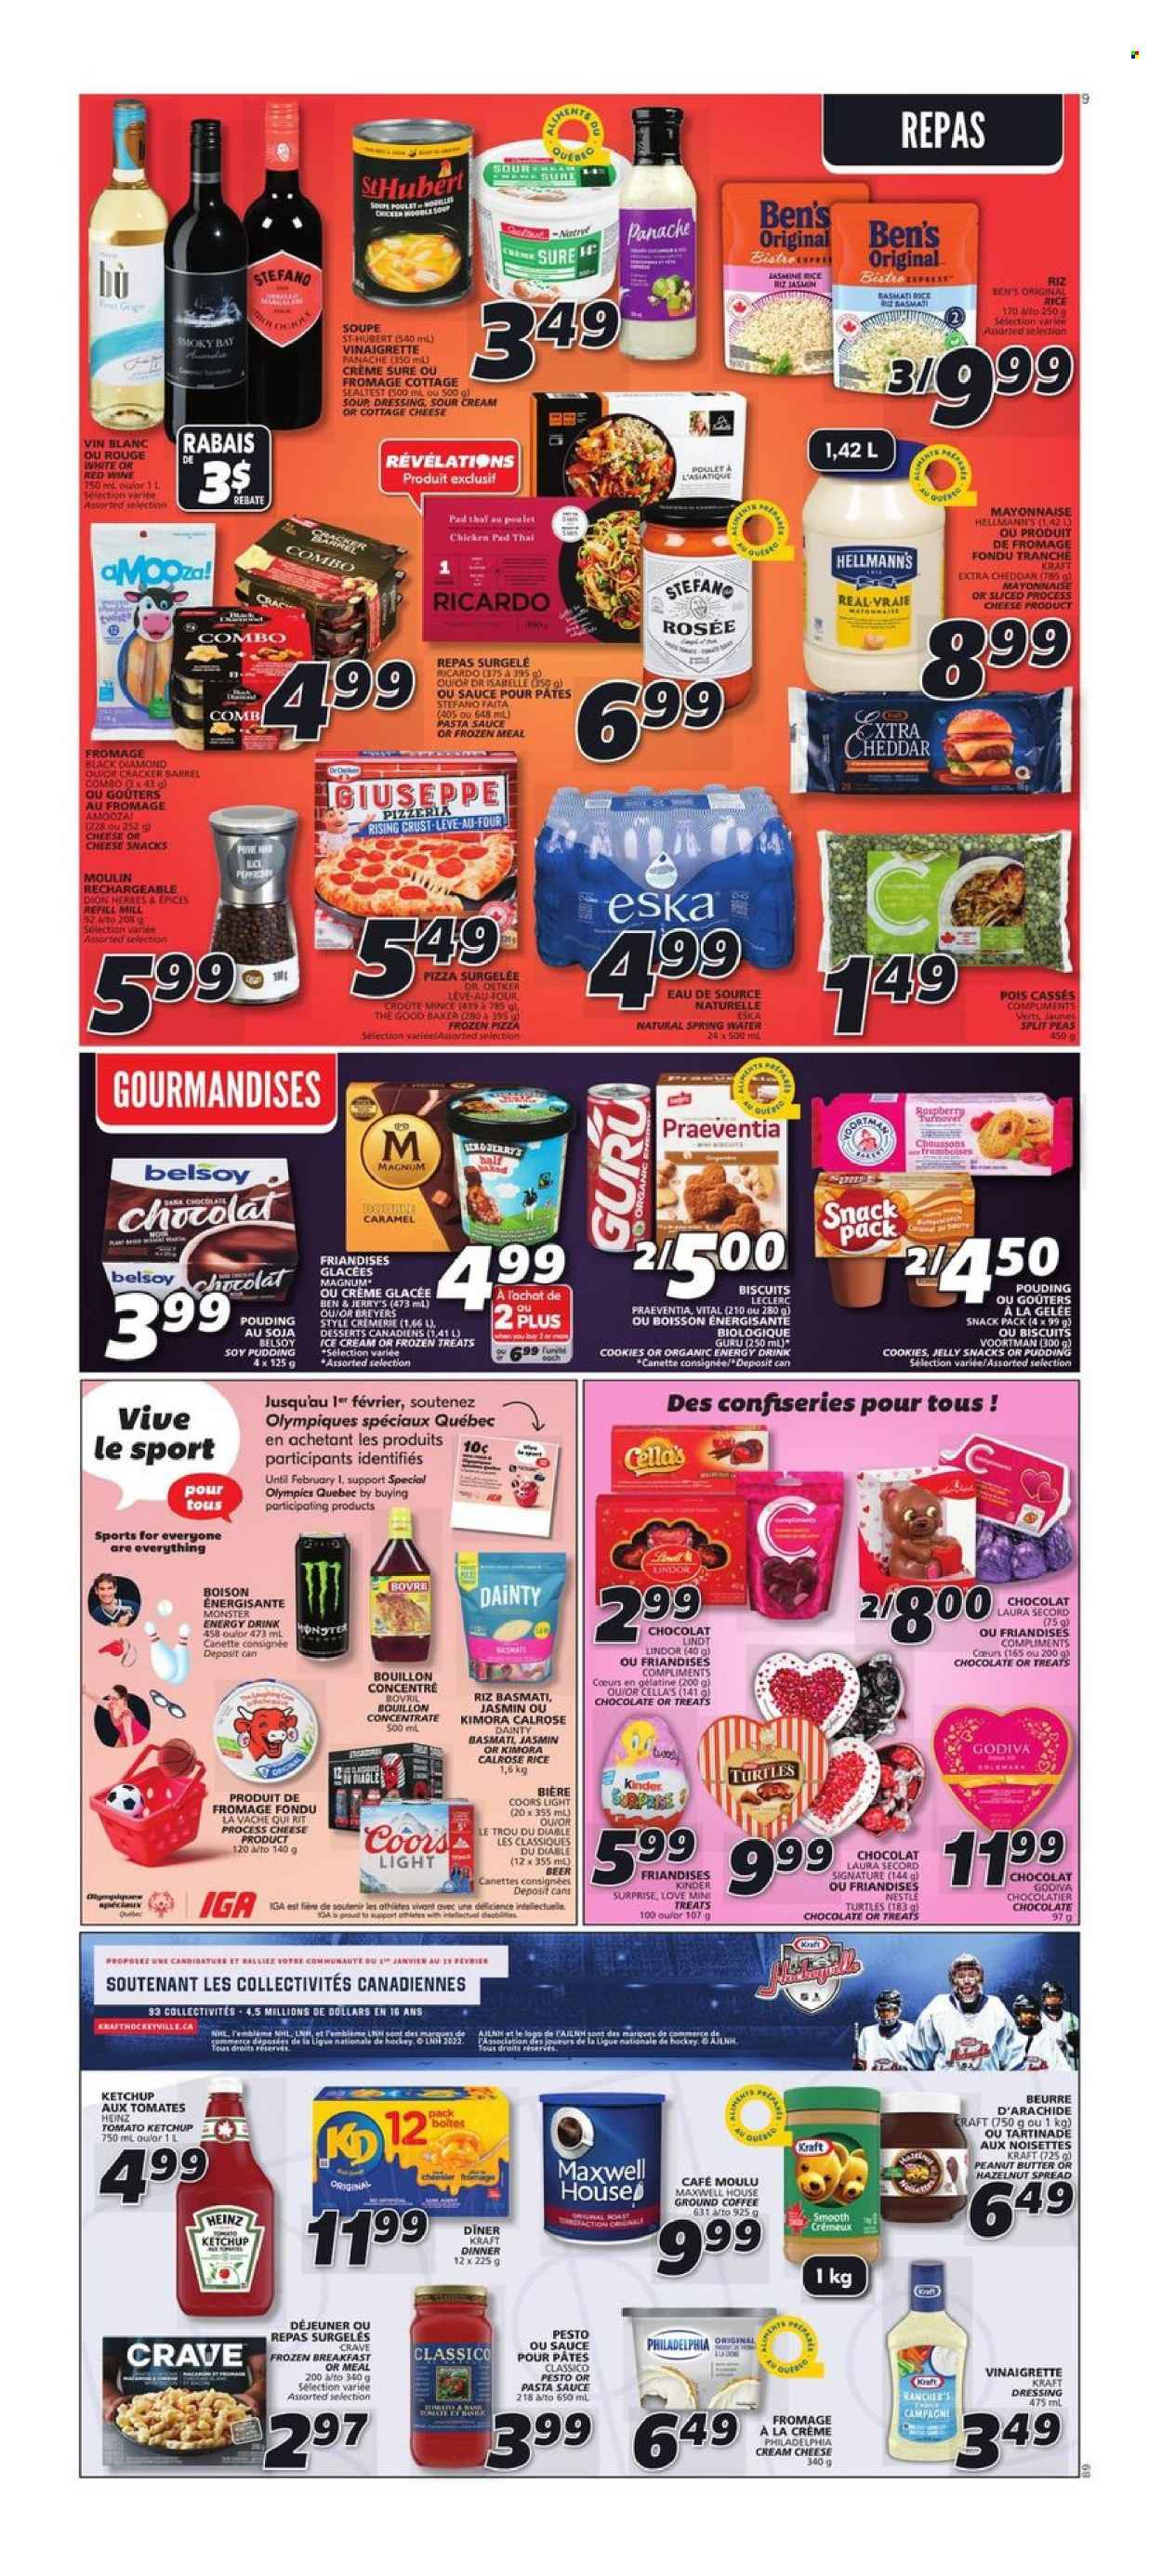 thumbnail - IGA Flyer - January 26, 2023 - February 01, 2023 - Sales products - peas, pizza, pasta sauce, soup, sauce, Kraft®, cottage cheese, cream cheese, cheddar, The Laughing Cow, Dr. Oetker, pudding, sour cream, mayonnaise, Hellmann’s, Magnum, ice cream, Ben & Jerry's, split peas, cookies, Kinder Surprise, jelly, Godiva, crackers, biscuit, bouillon, basmati rice, rice, jasmine rice, vinaigrette dressing, dressing, Classico, peanut butter, hazelnut spread, energy drink, Monster, Monster Energy, spring water, Maxwell House, coffee, ground coffee, beer, Heinz, ketchup, pesto, Philadelphia, Lindt, Lindor, Coors. Page 8.